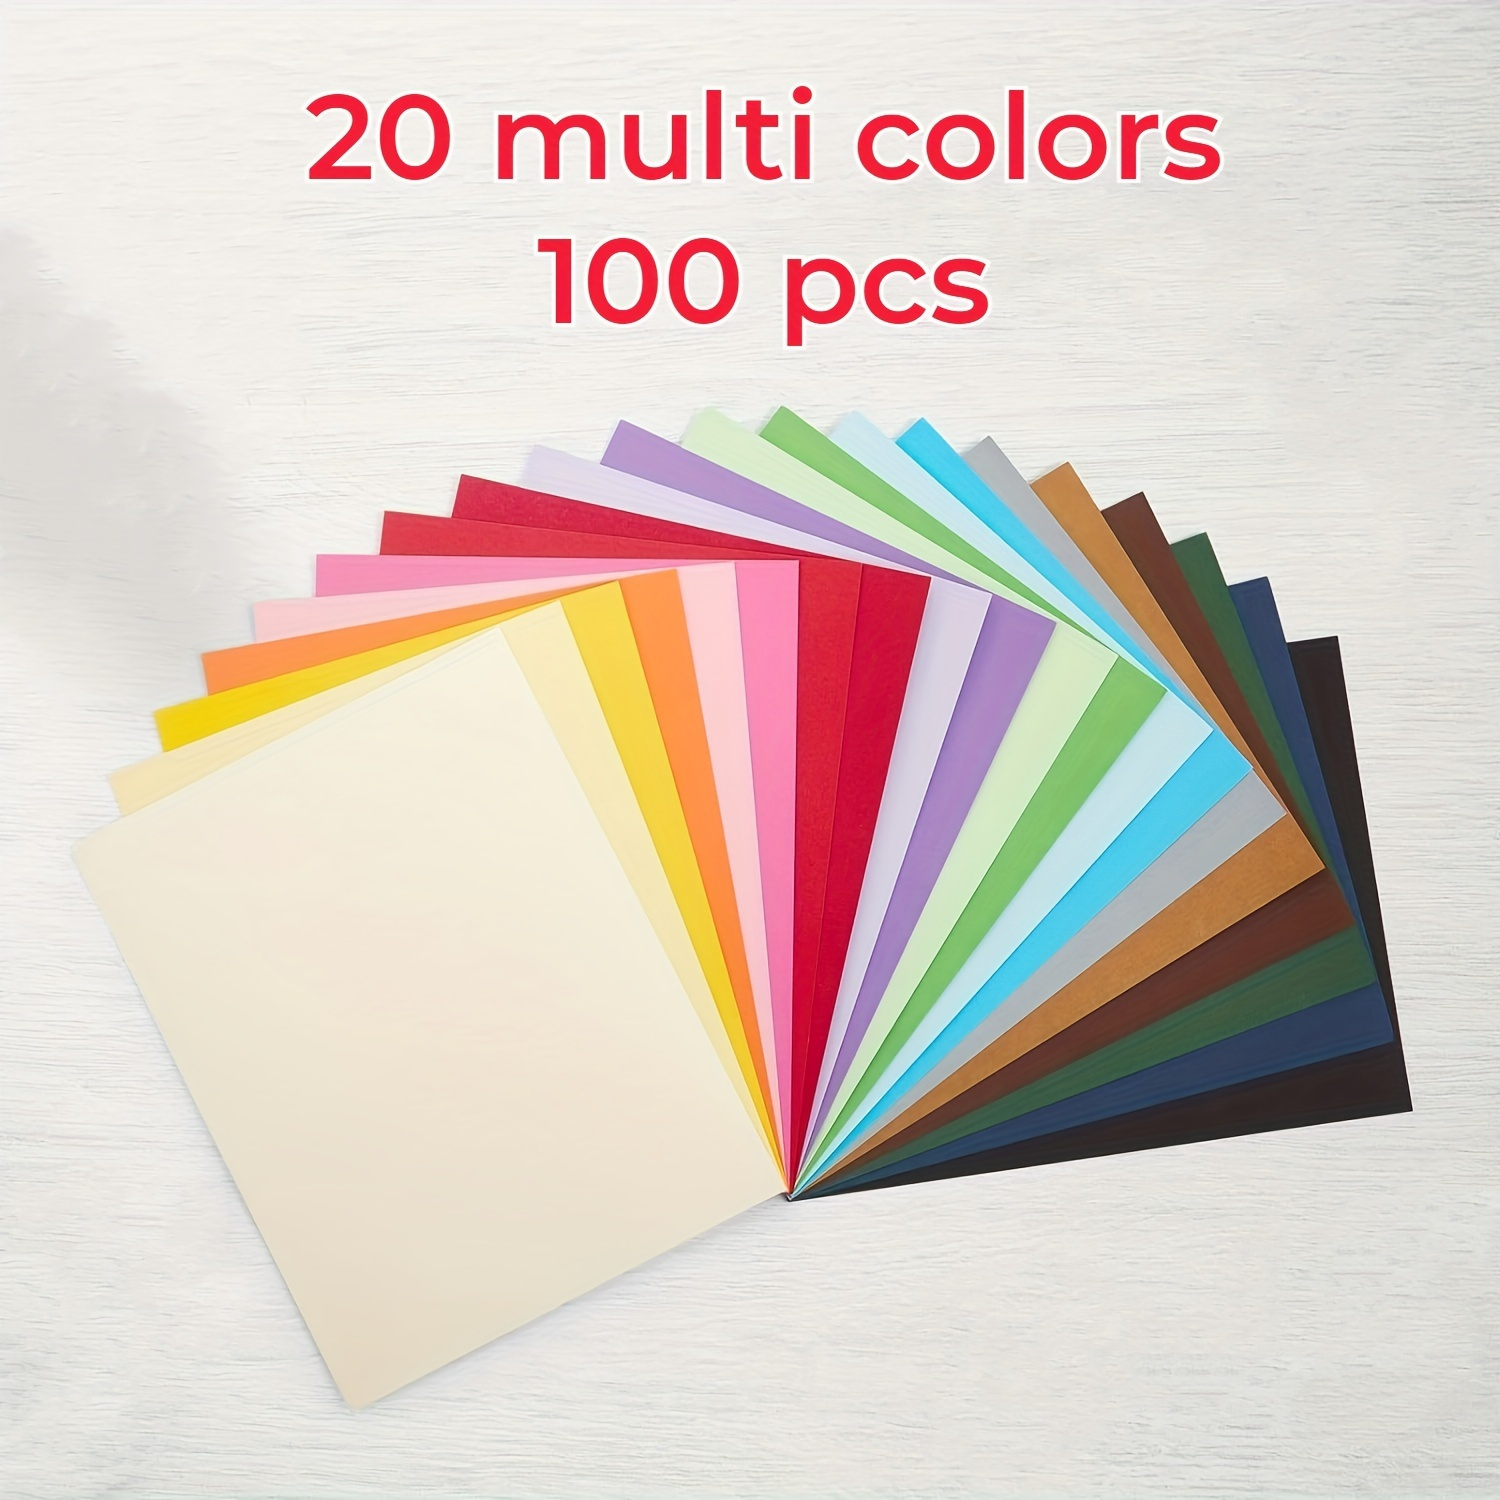 

Value Pack 100pcs 20-color Rainbow Series, A4 Size 8.3 X 11.7in For Birthday, Easter, Mother's Day, Father's Day, Halloween, Christmas, Graduation, Parties